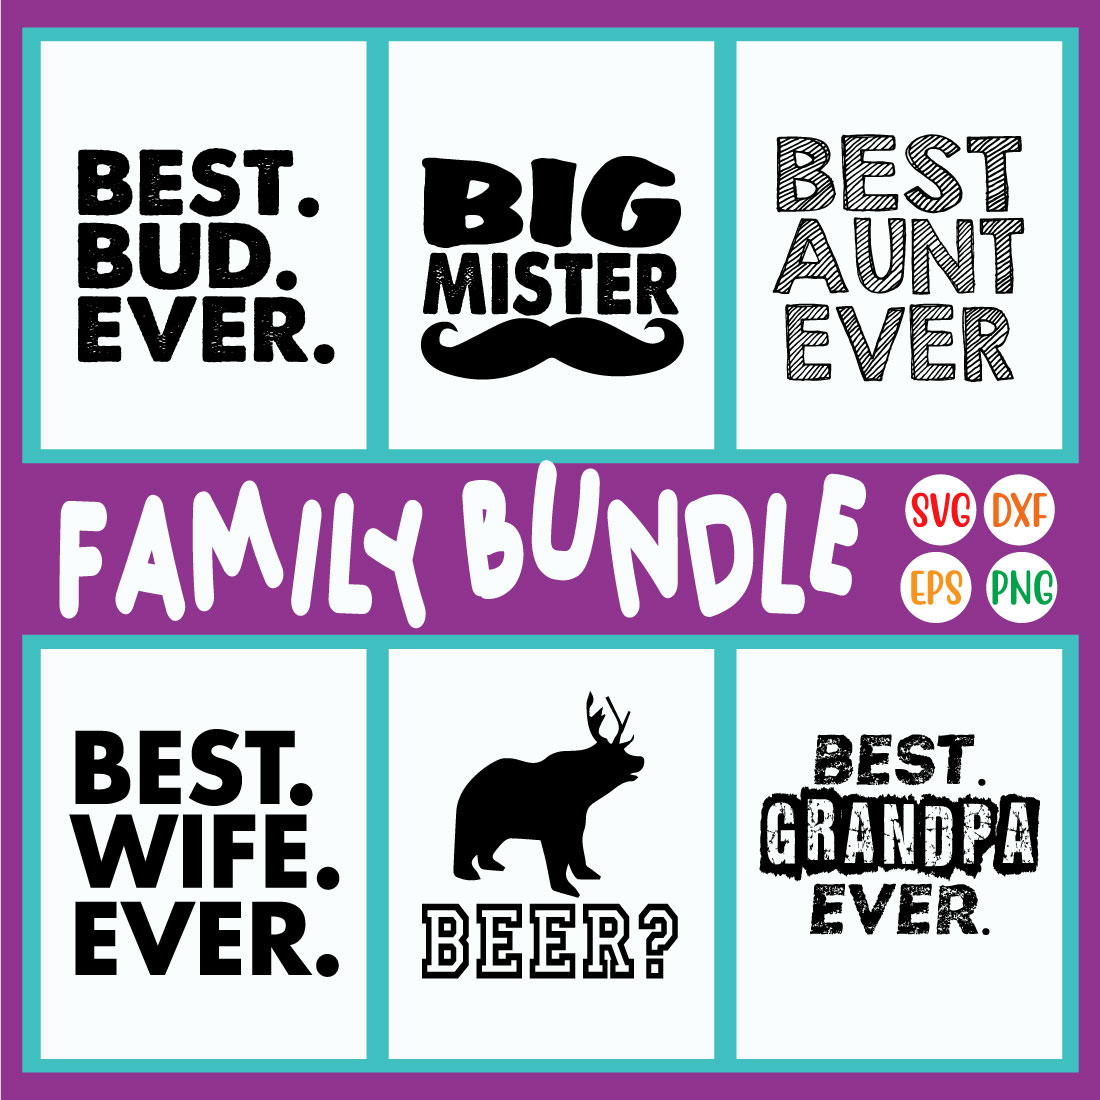 Funny Quotes Family Designs Vol8 cover image.